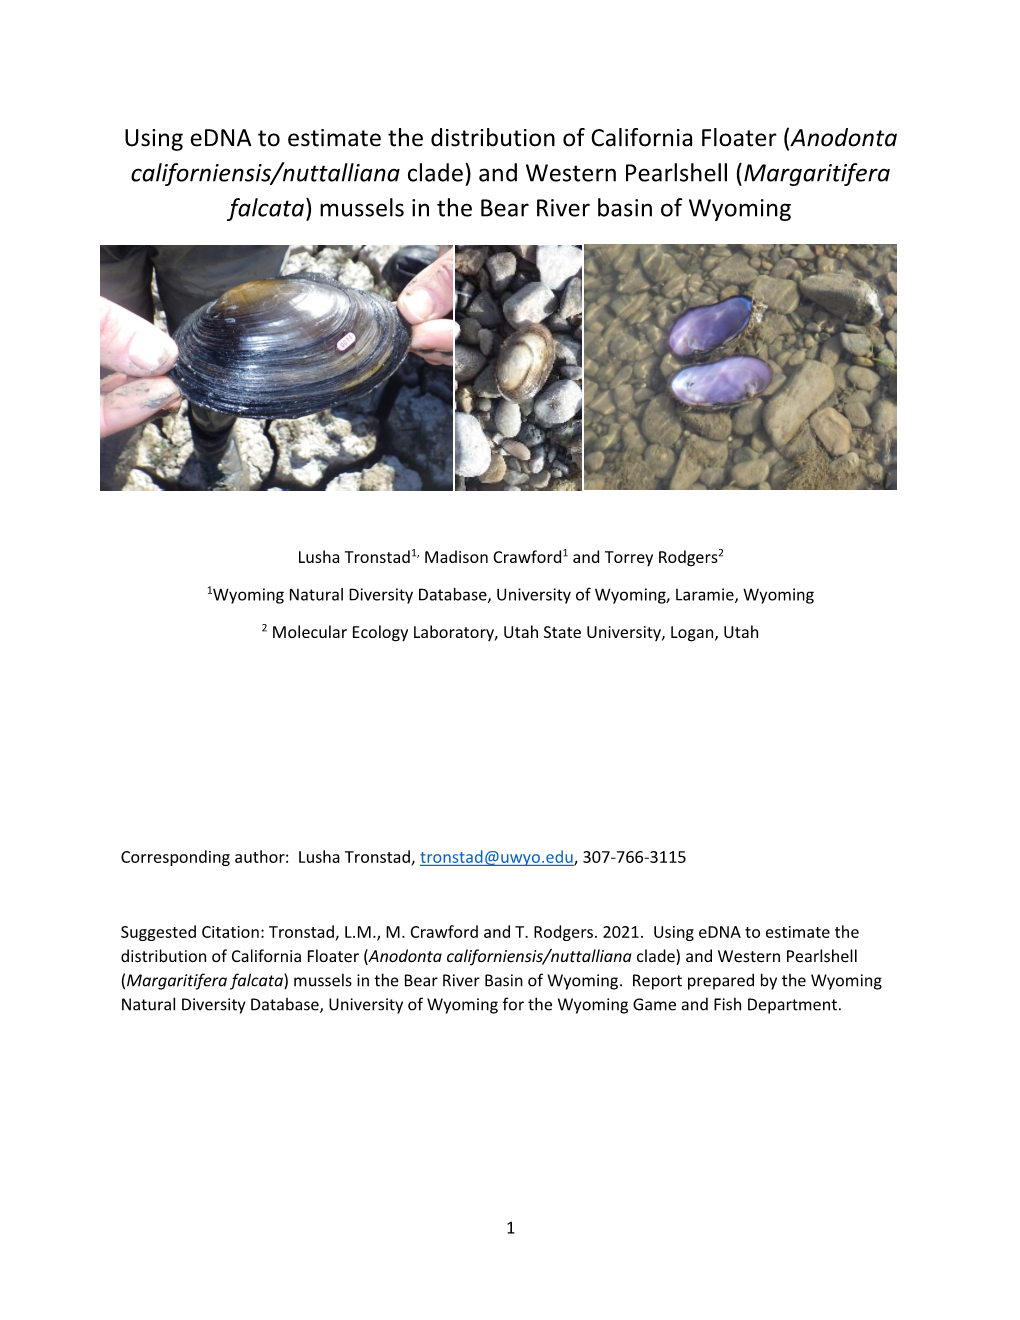 Anodonta Californiensis/Nuttalliana Clade) and Western Pearlshell (Margaritifera Falcata) Mussels in the Bear River Basin of Wyoming